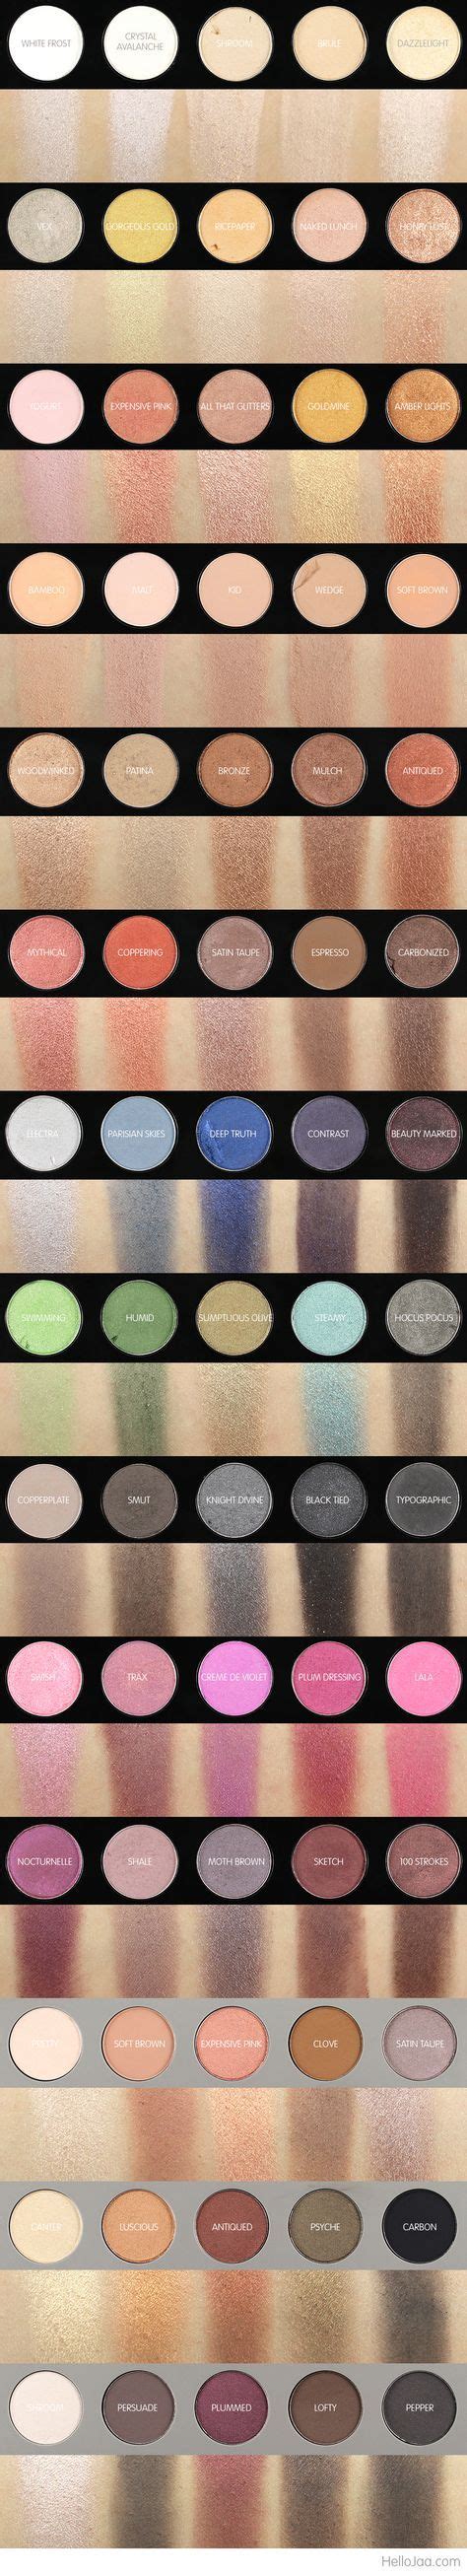 My Mac Eyeshadow Collection Review And Swatches Mac Makeup Eyeshadow